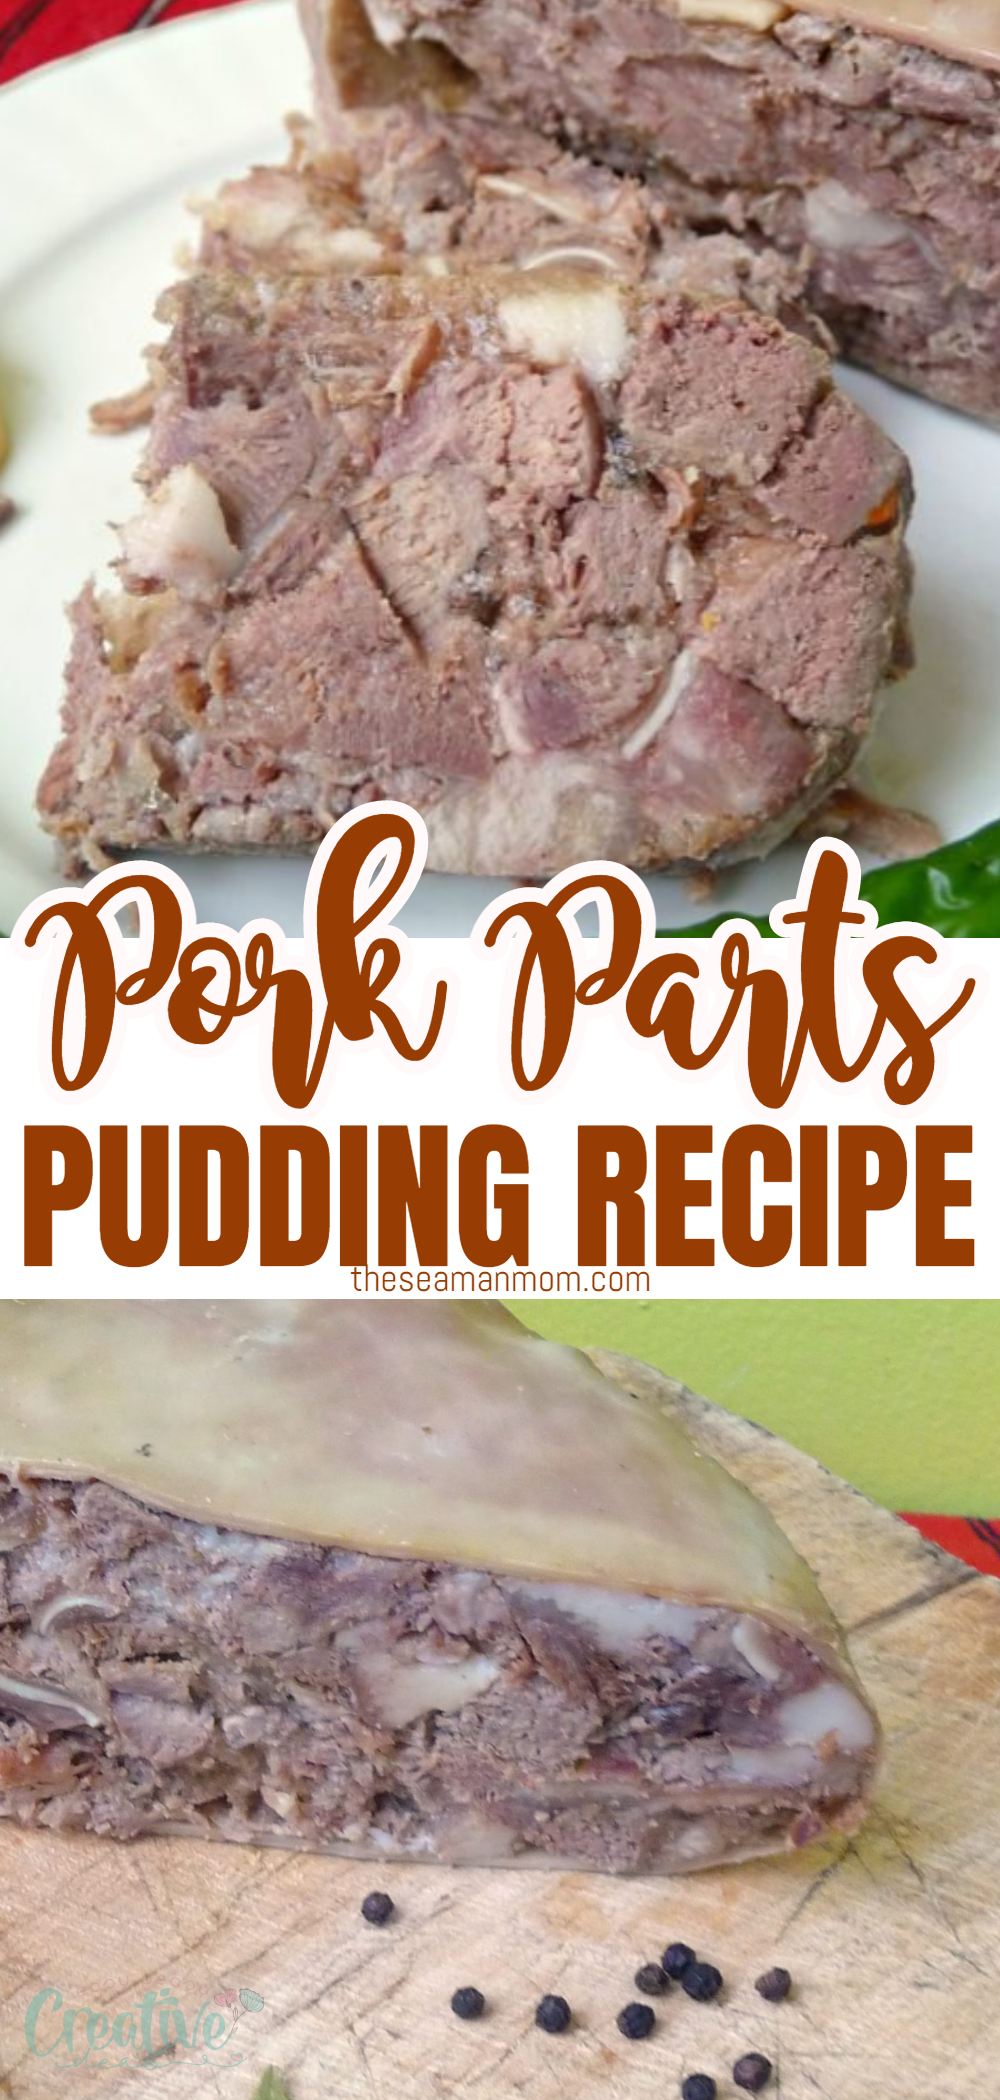 Pork pudding is a mix of pork parts cooked with spices and garlic which make this recipe really unique and a very savory dish! via @petroneagu